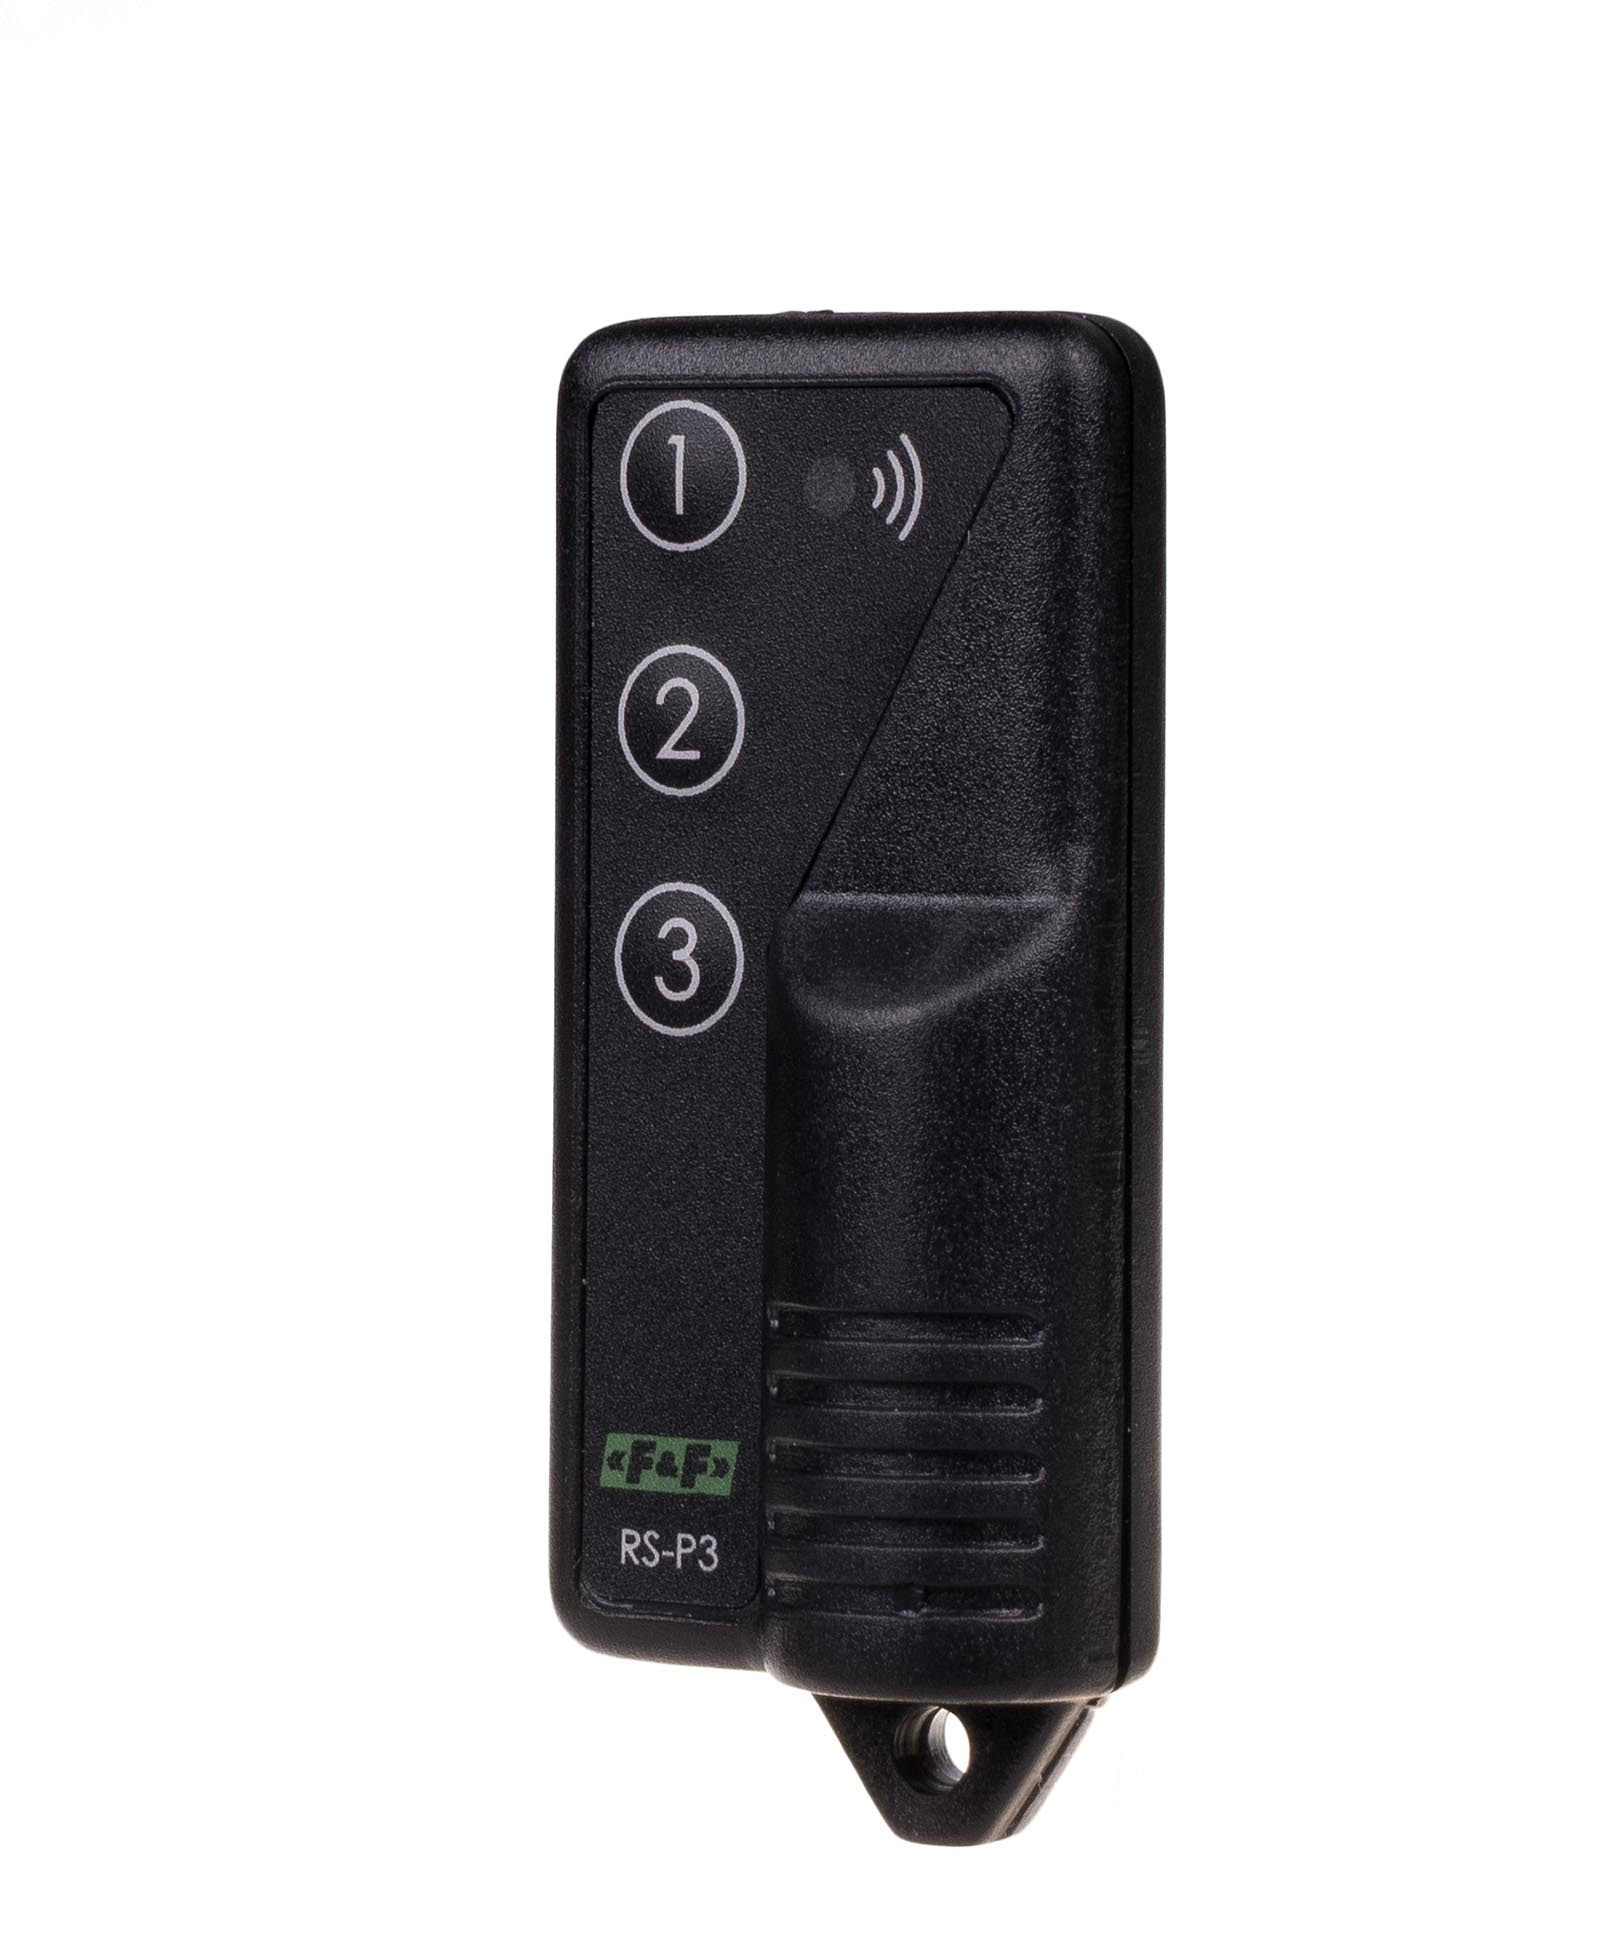 RS-P3 radio pah relay transmitter  - remote control three pushbutton